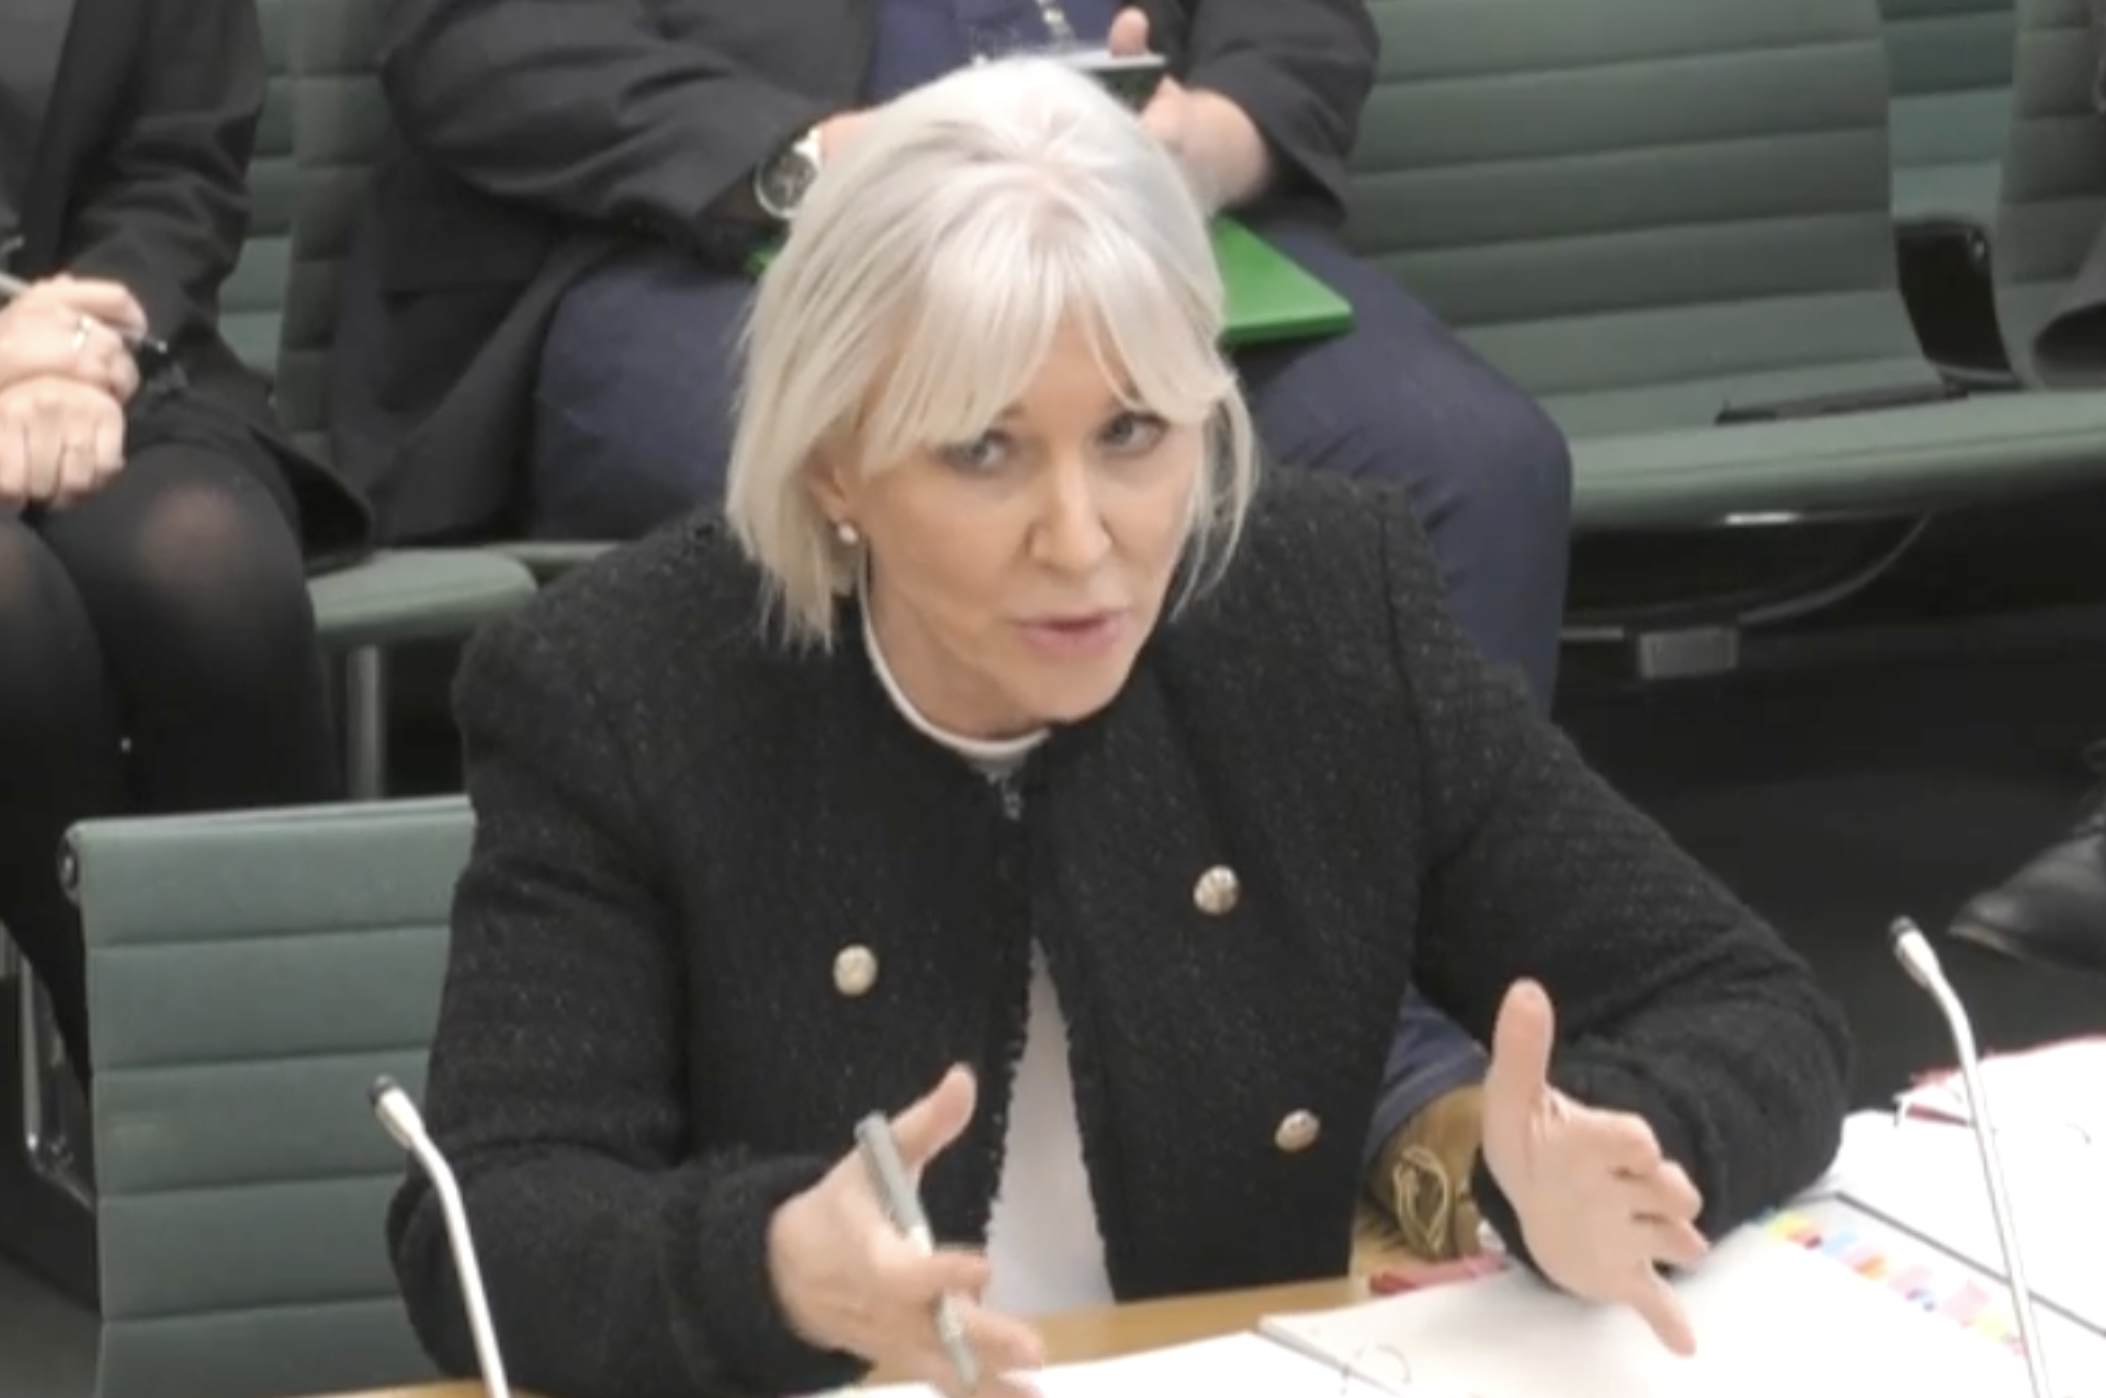 Grilled Nadine Dorries ‘grotesque’And ‘defamatory’Tweets from a select committee hearing